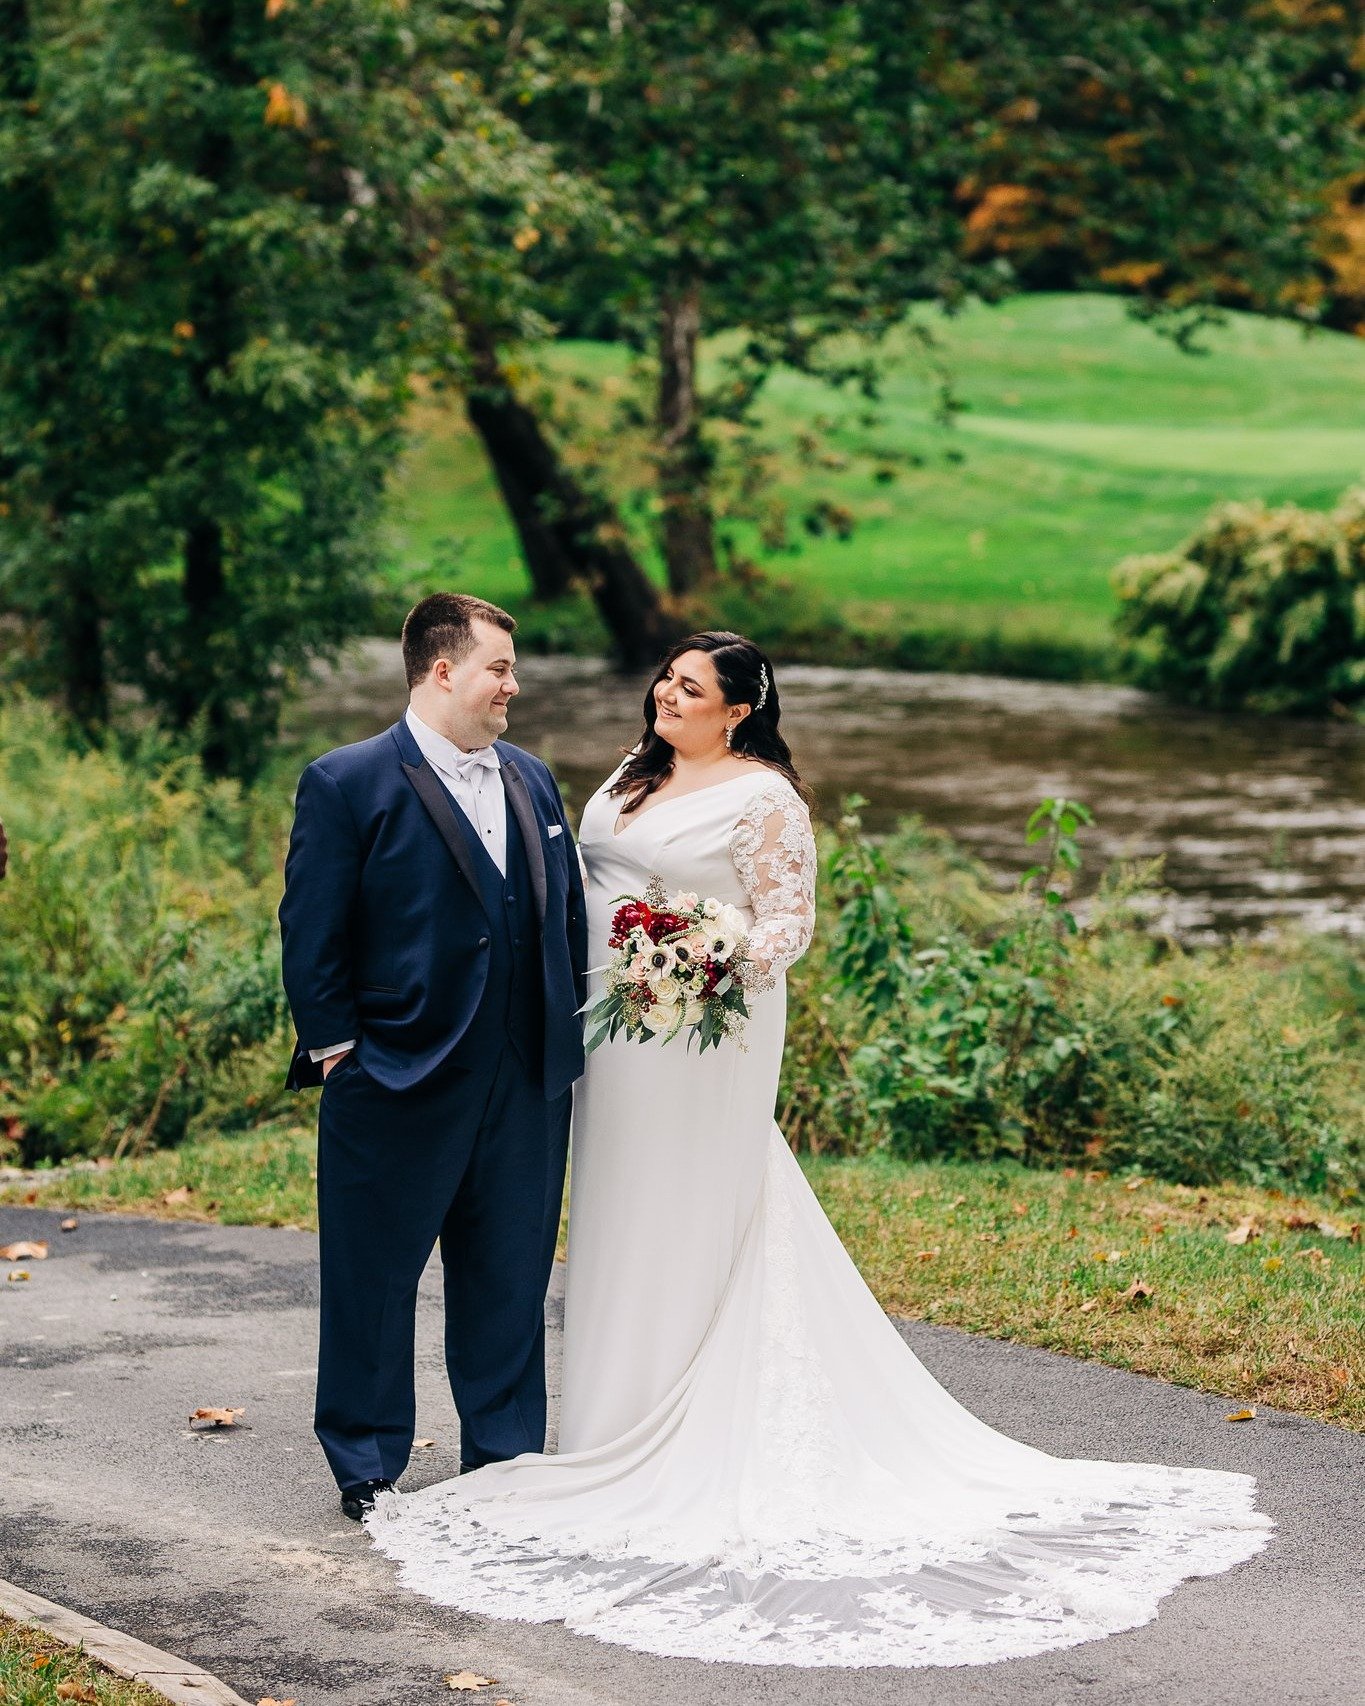 &quot;Erica and her team were an incredible addition to our wedding day. She went out of her way to capture all of the moments, even down to the detailing on our tables, wedding bands, and more. Erica made us feel comfortable from the start, and we c